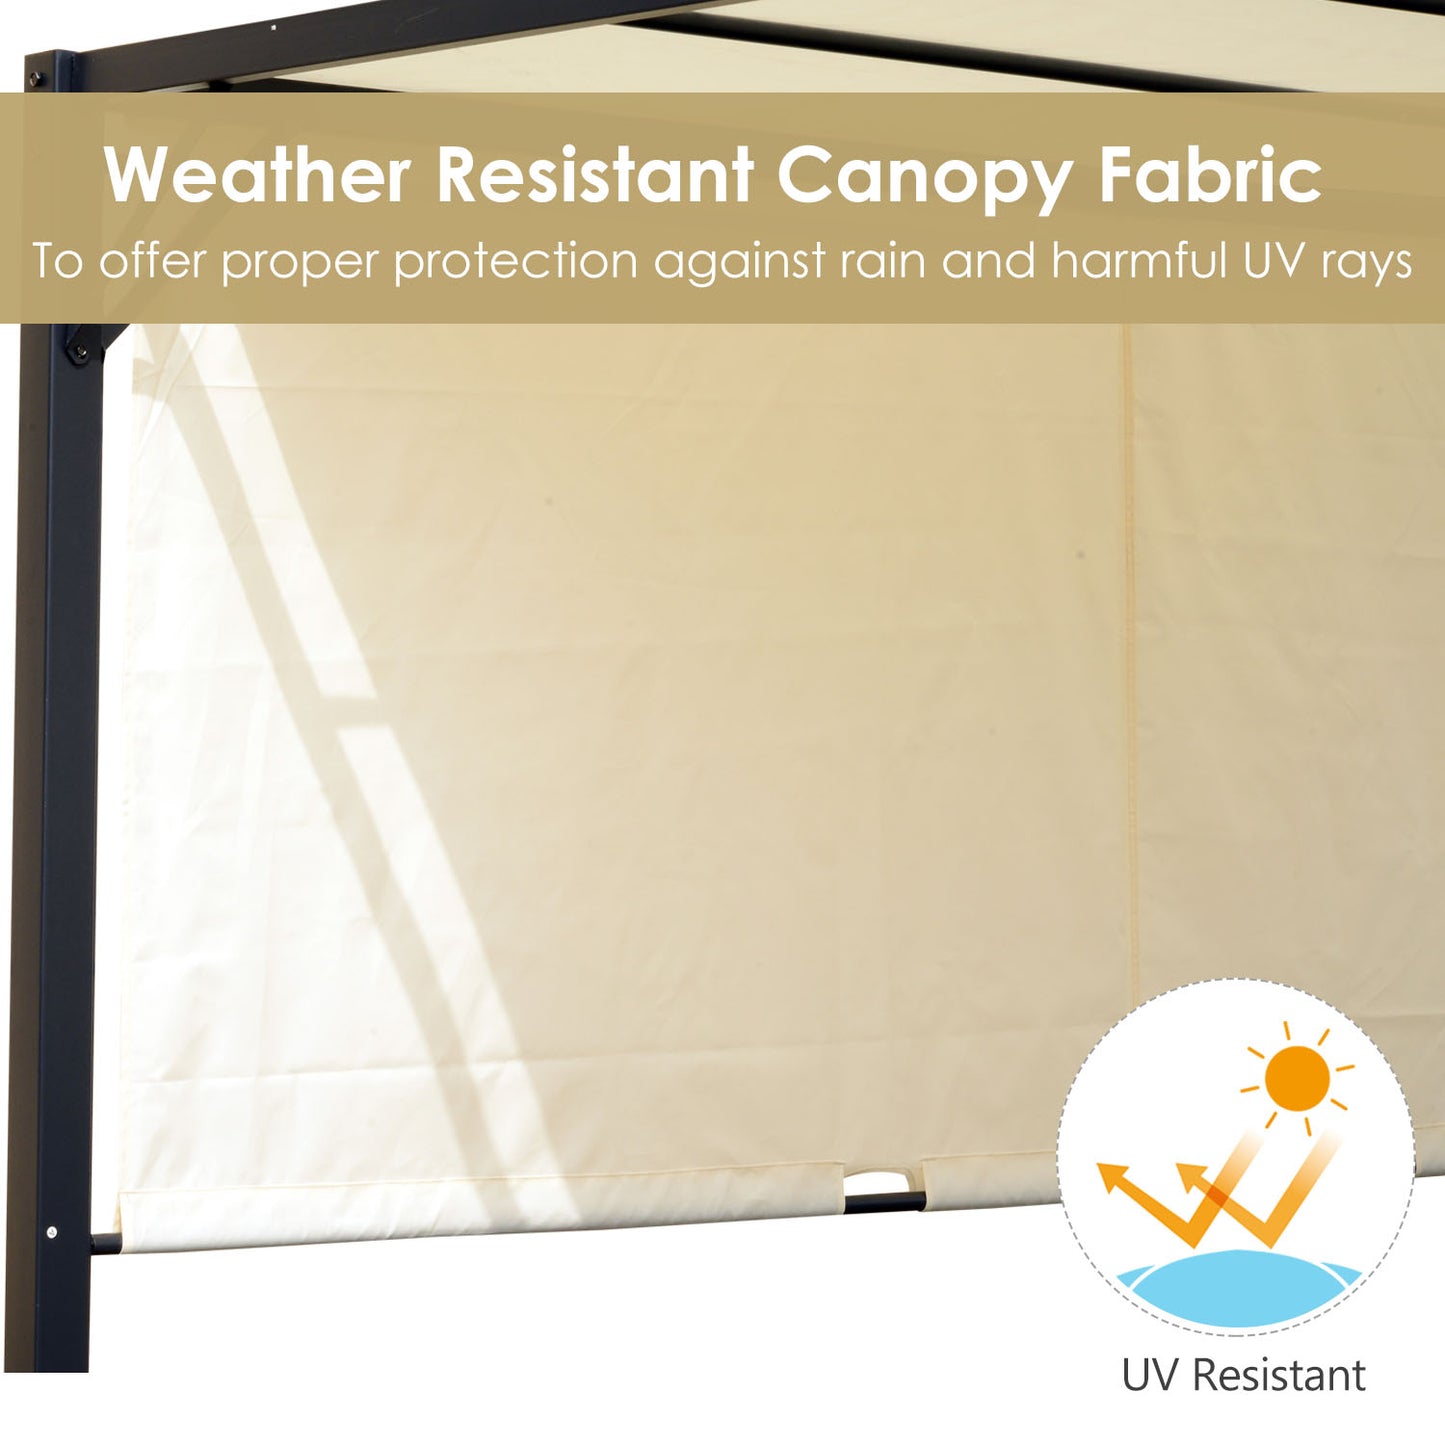 Outsunny 3 X 3 Meters Garden Metal Gazebo Party Canopy Outdoor Tent Sun Shelter Removable & Adjustable Cover Canopy Cream